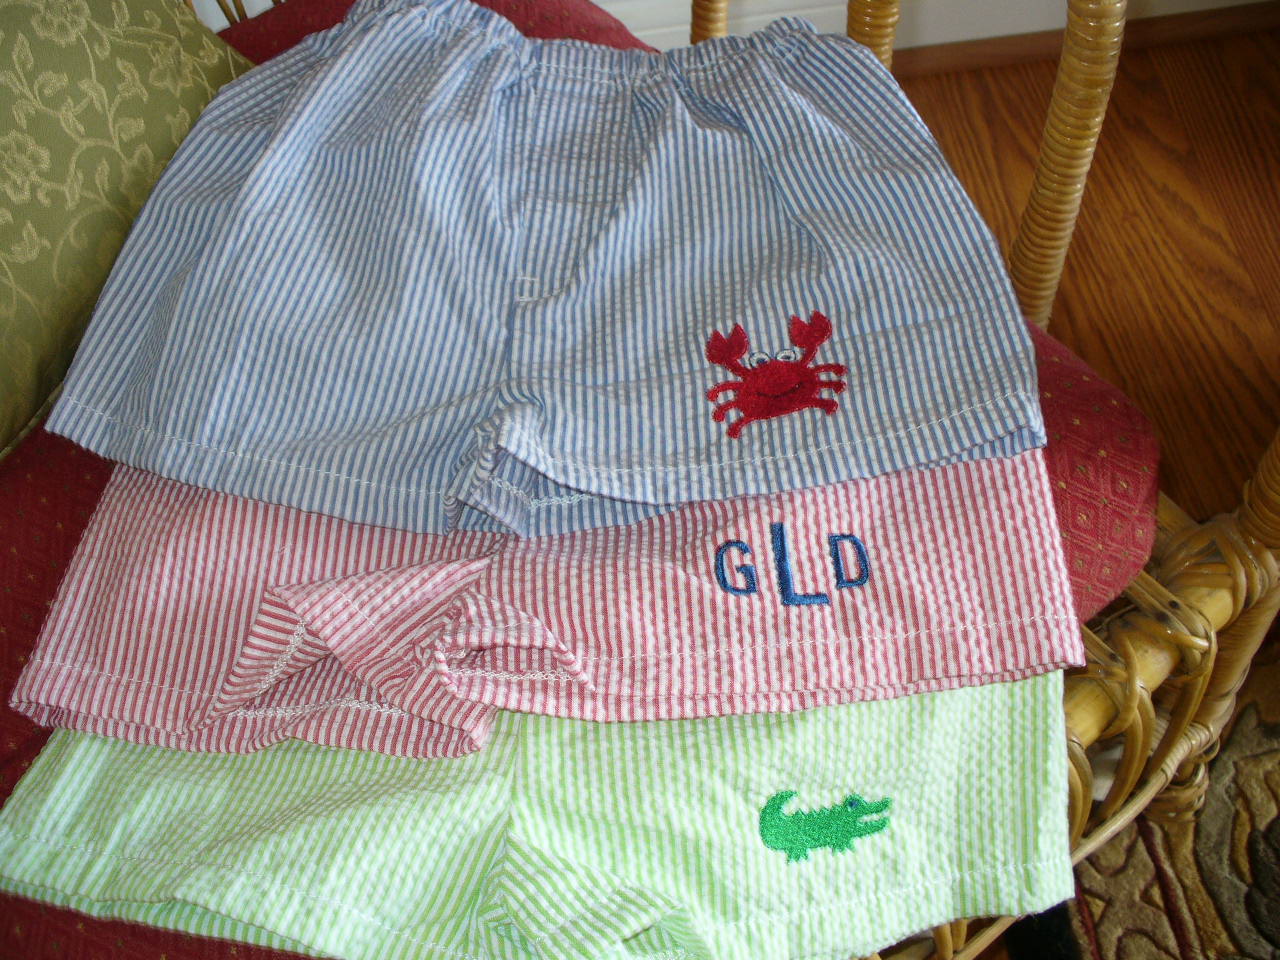 Seersucker Boxer Shorts-in blue embroidered with red crab, red monogrammed, lime green with embroidered alligator